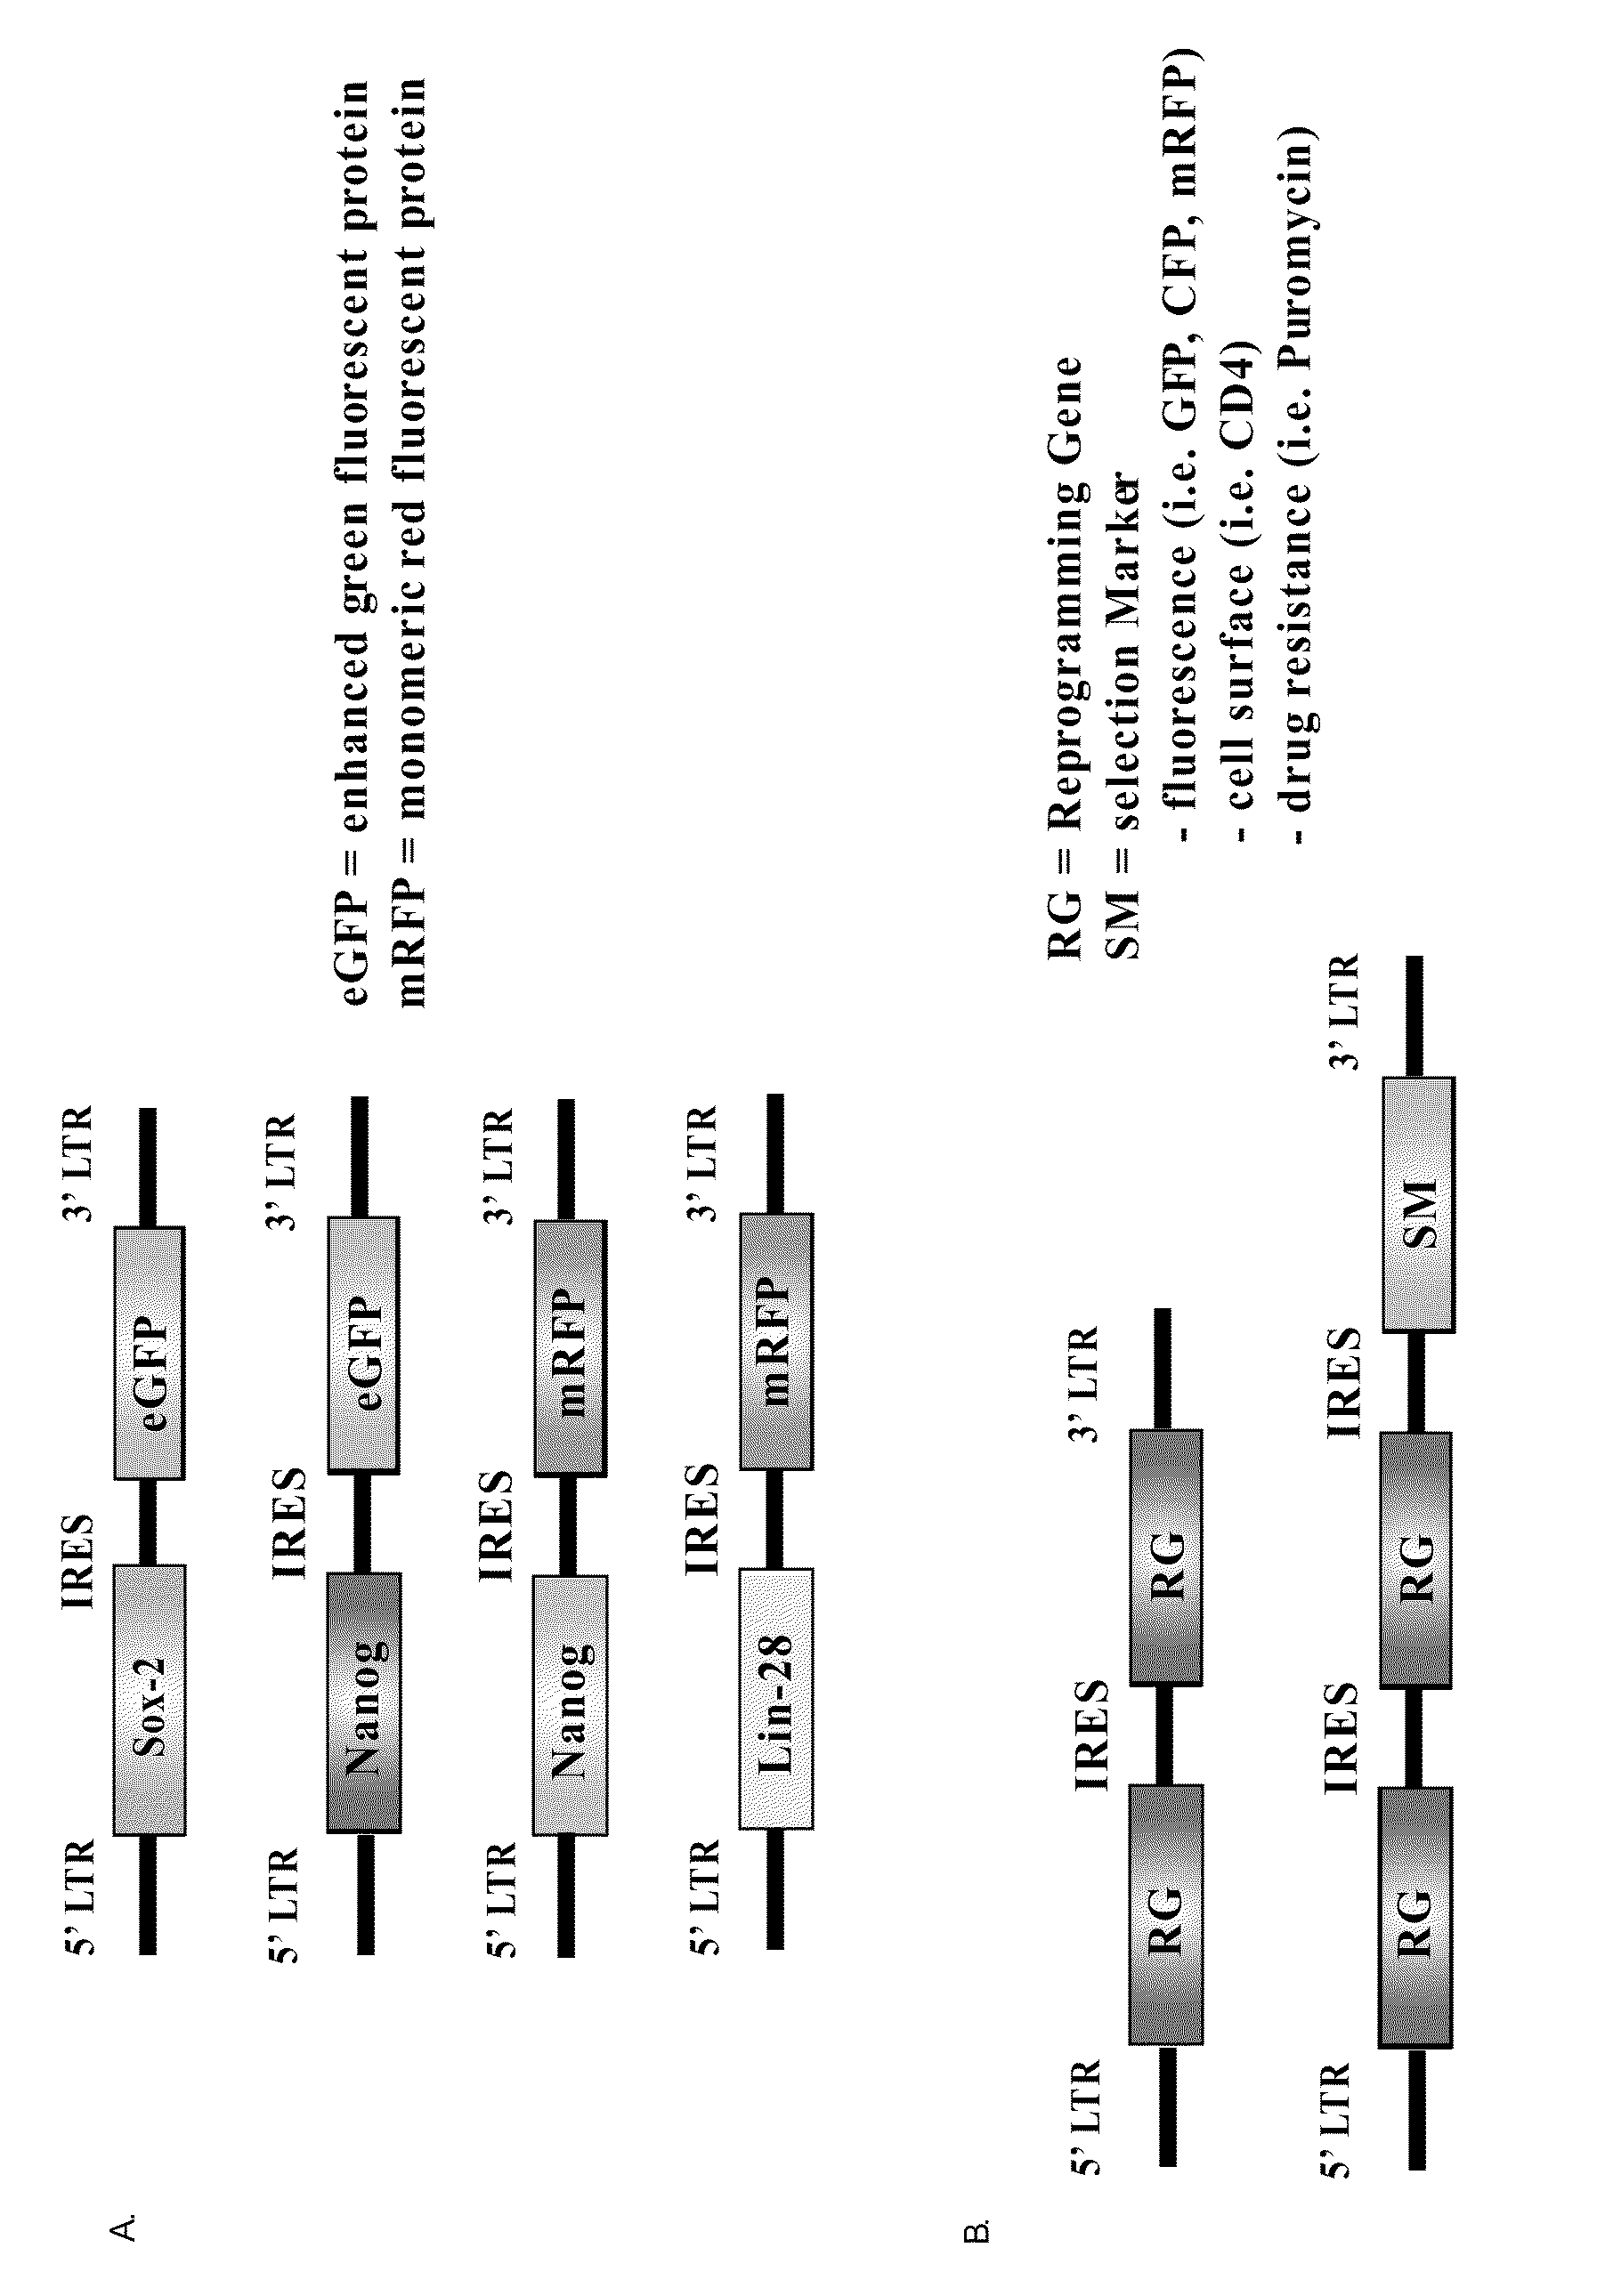 Methods for the production of iPS cells